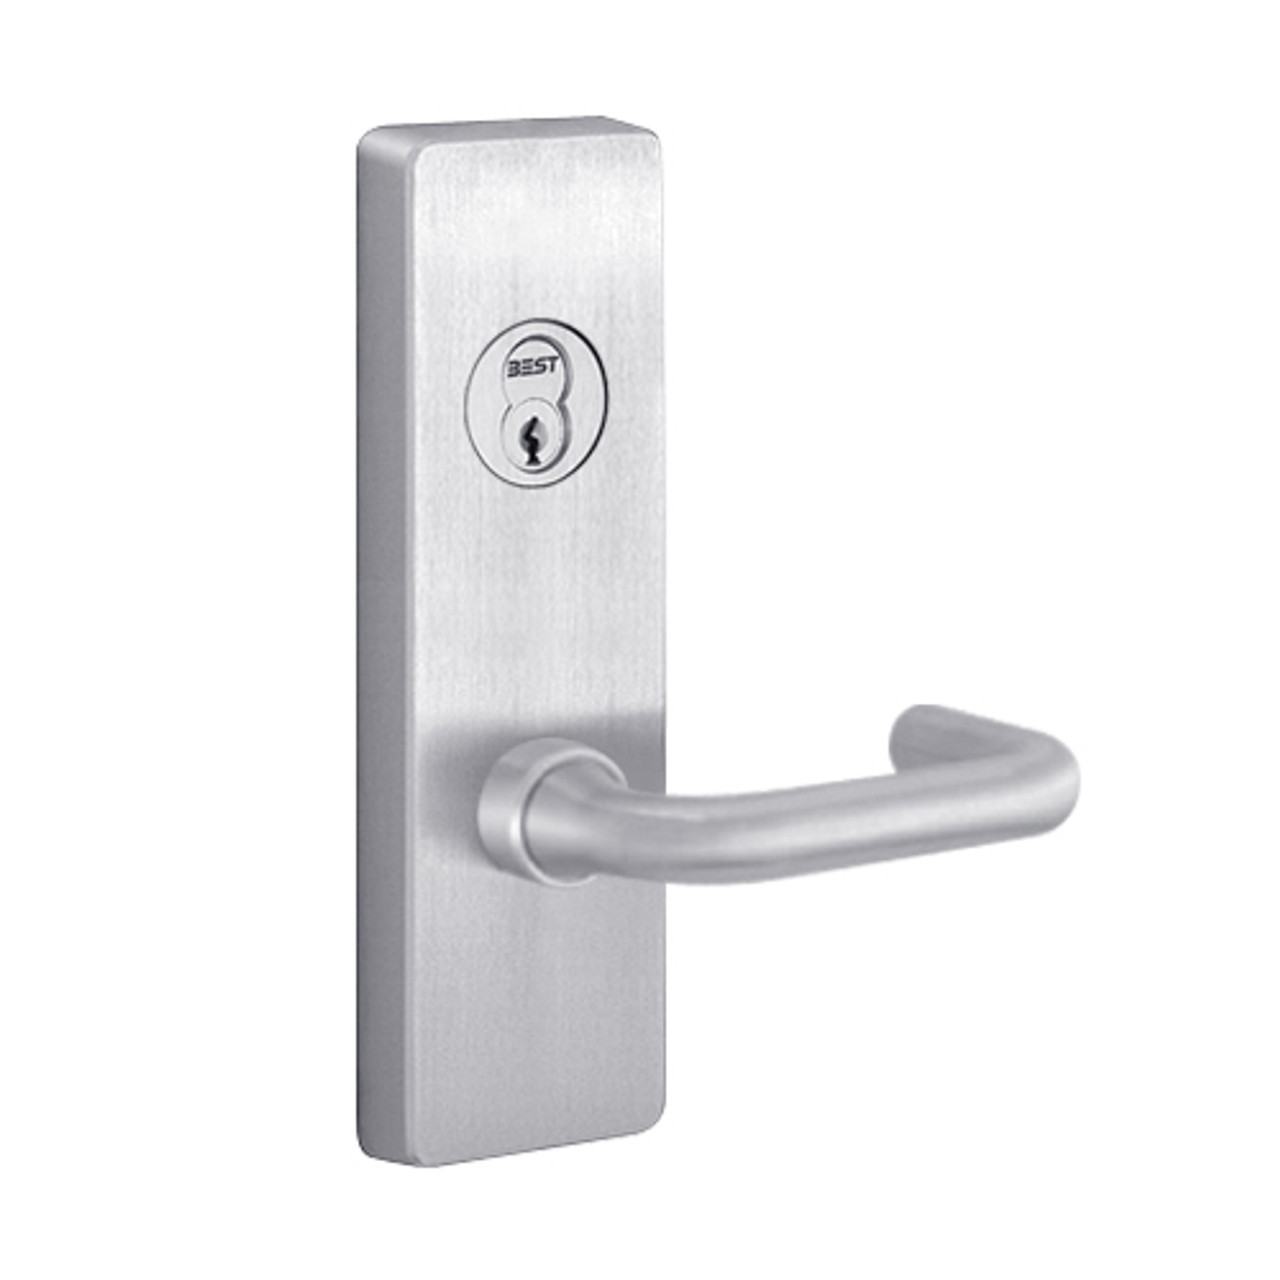 R4903C-625-LHR PHI Key Retracts Latchbolt Retrofit Trim with C Lever Design for Apex and Olympian Series Exit Device in Bright Chrome Finish